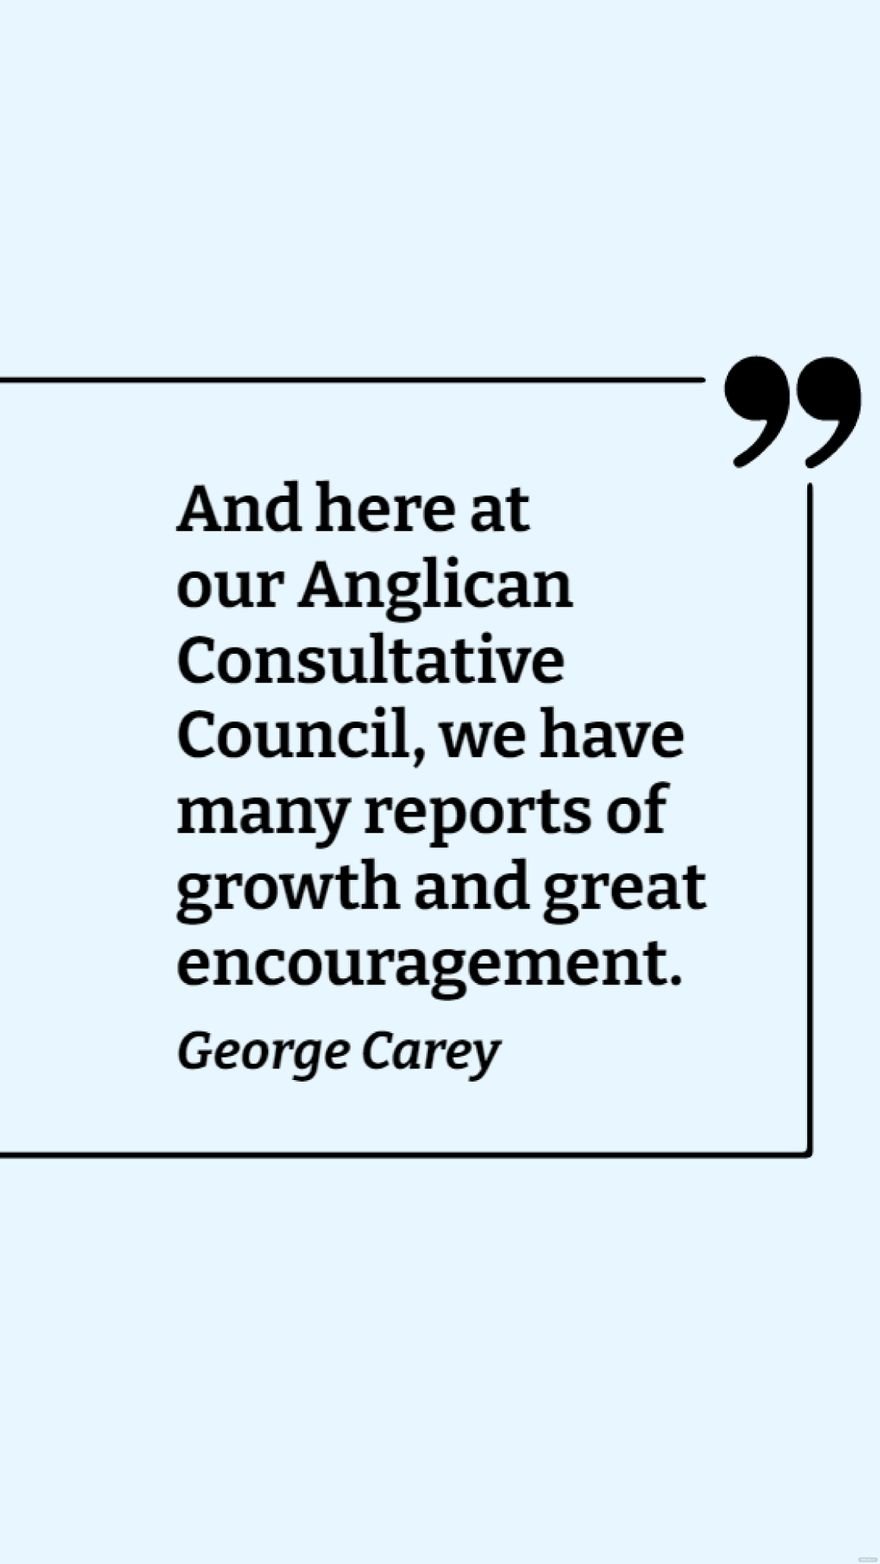 George Carey - And here at our Anglican Consultative Council, we have many reports of growth and great encouragement. in JPG